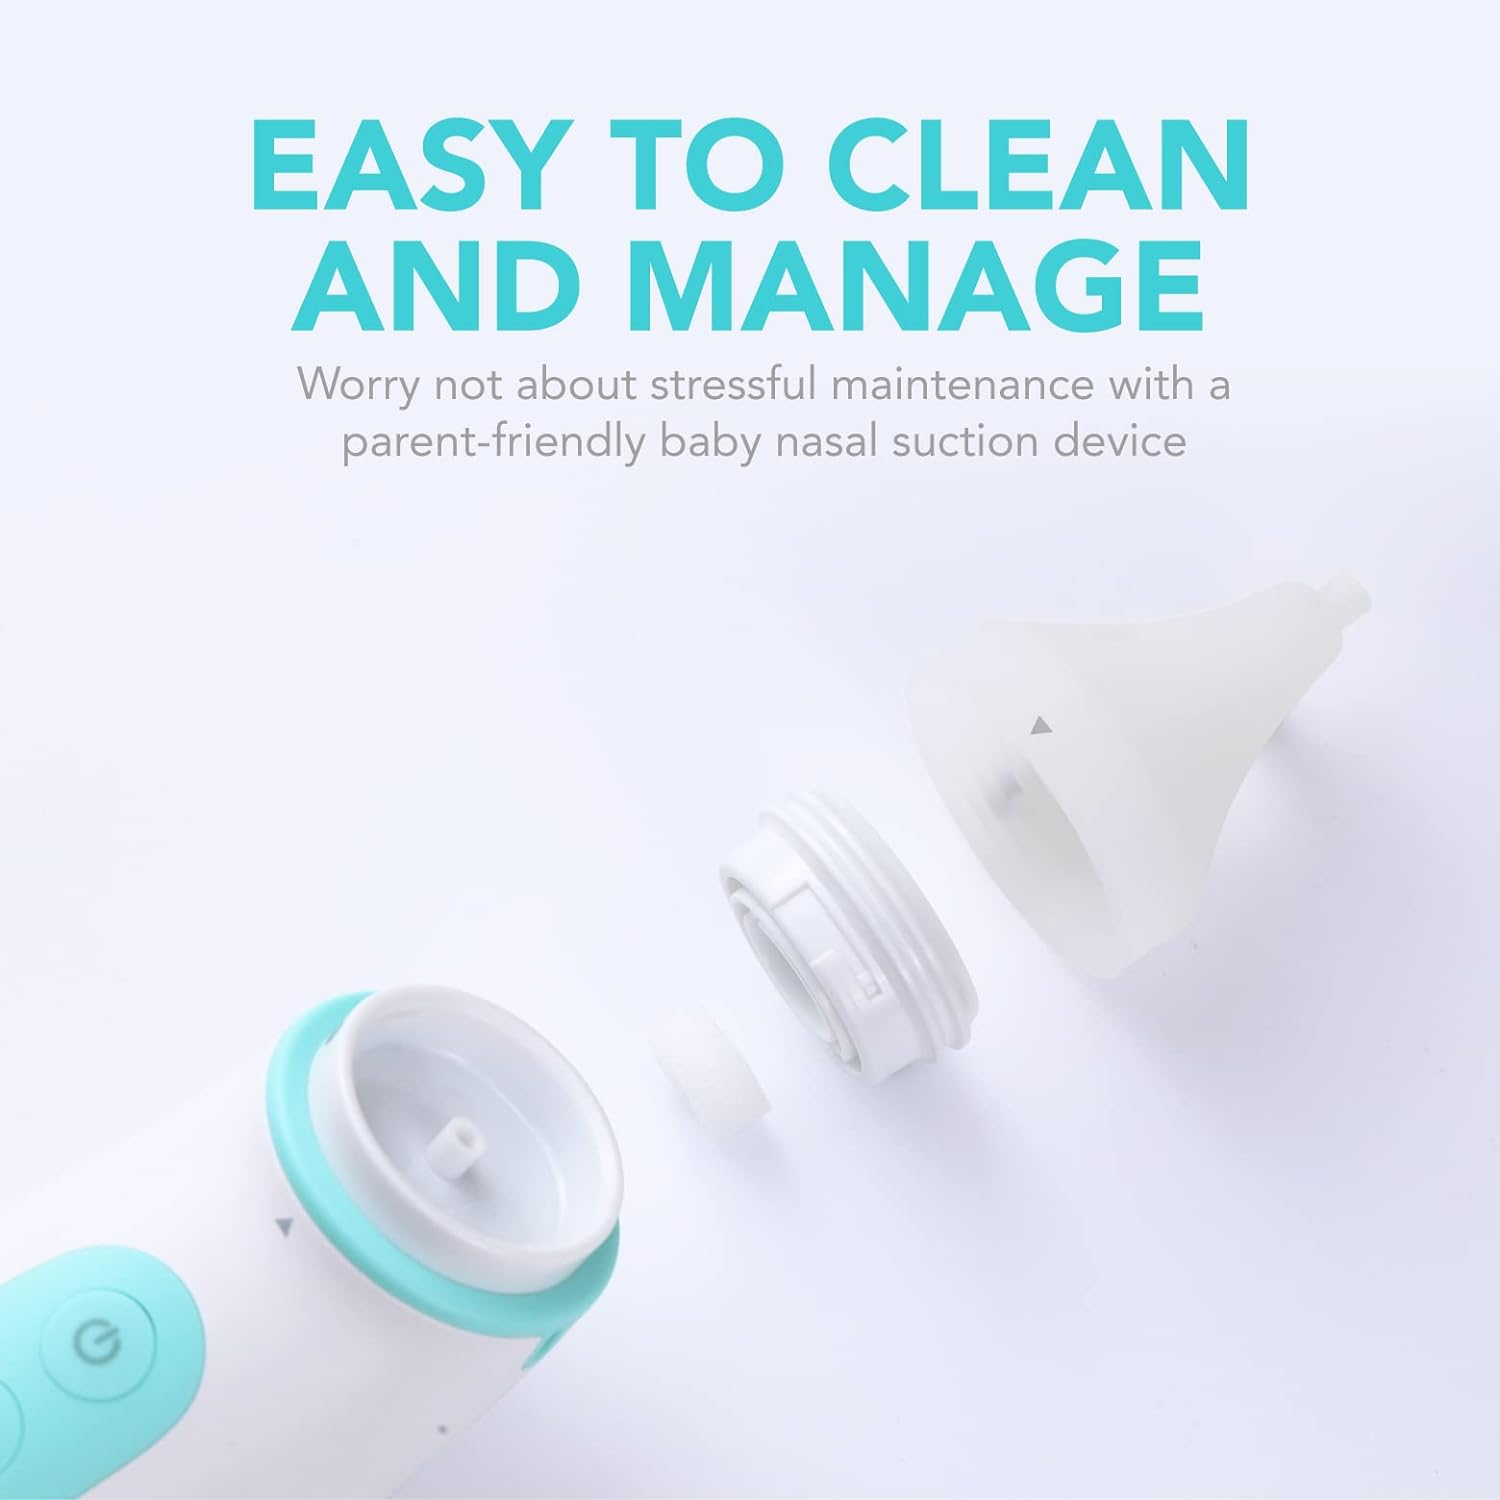 Lunobaby Nasal Aspirator for Babies - Rechargeable Baby Nose Sucker Must-Haves for First Time Mom - Electric Nose Aspirator for Infants and Toddlers